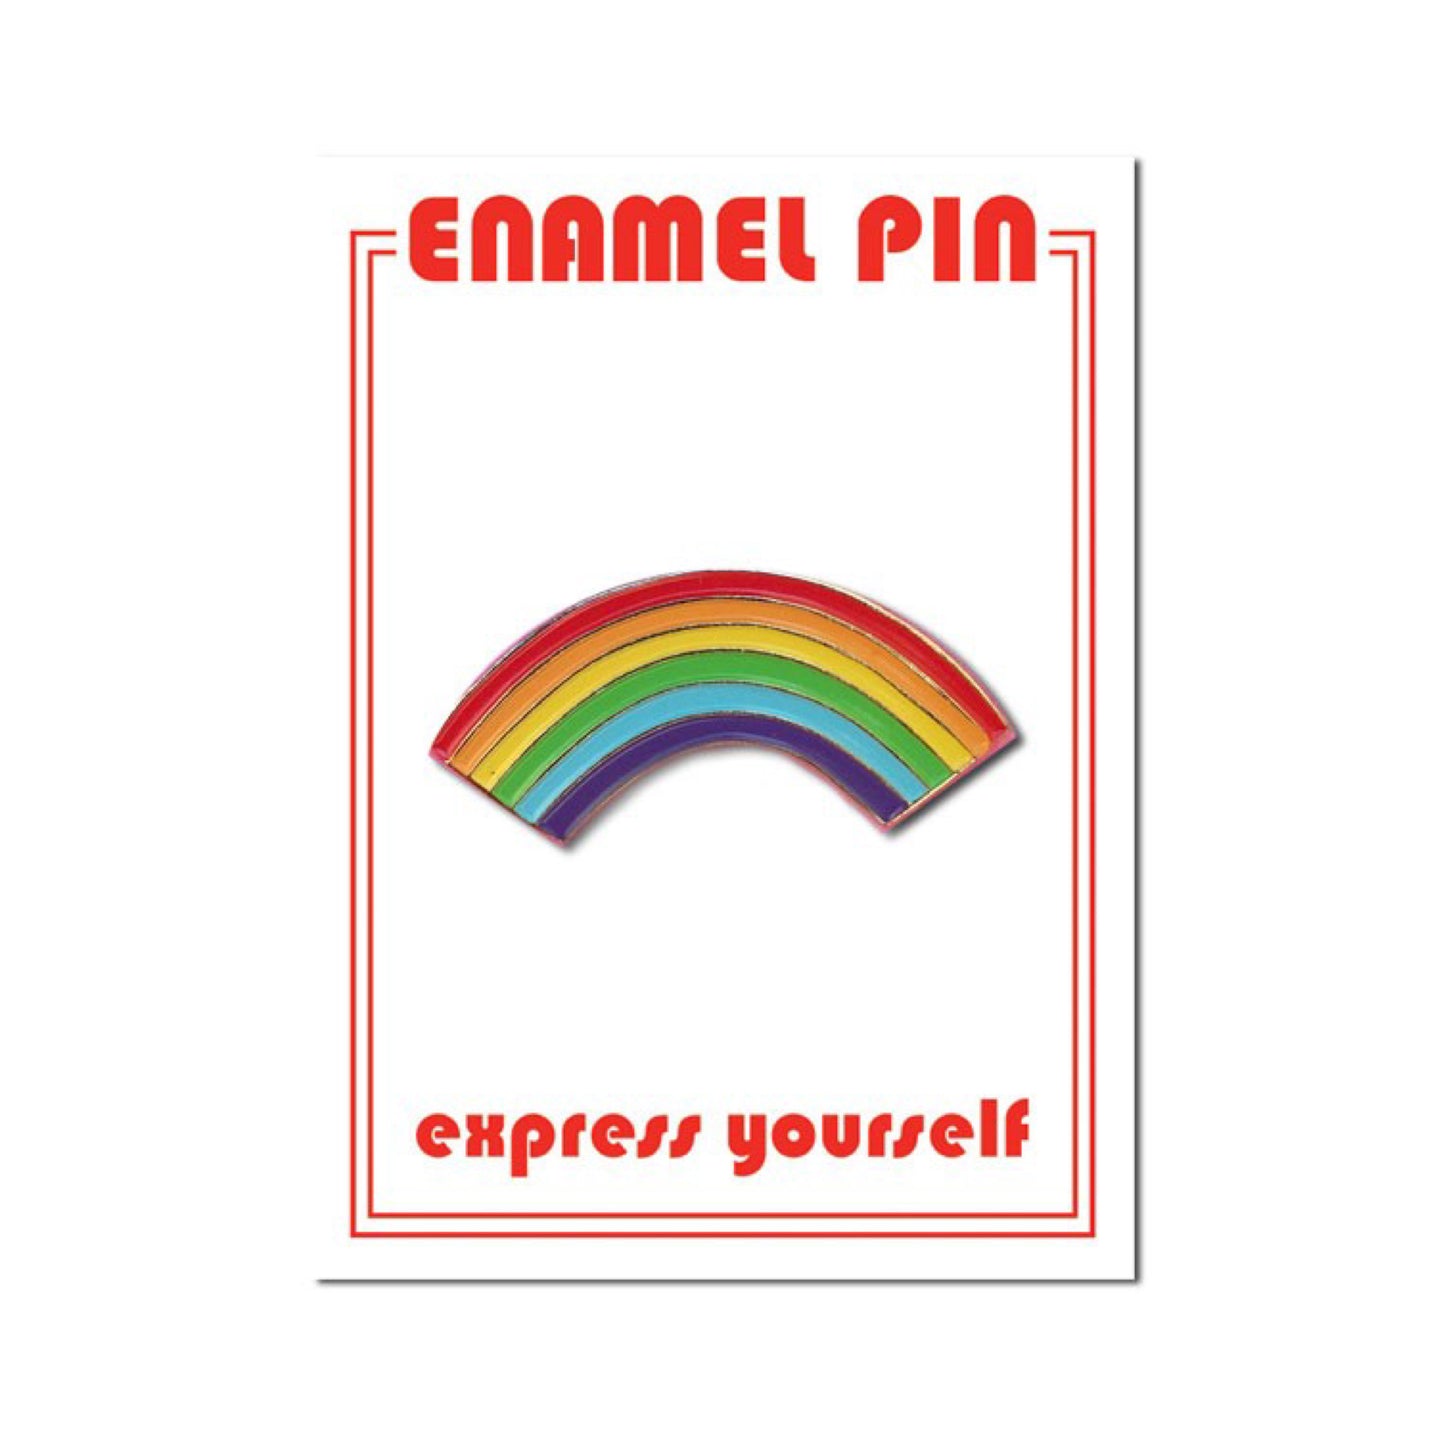 Rainbow Pin by The Found